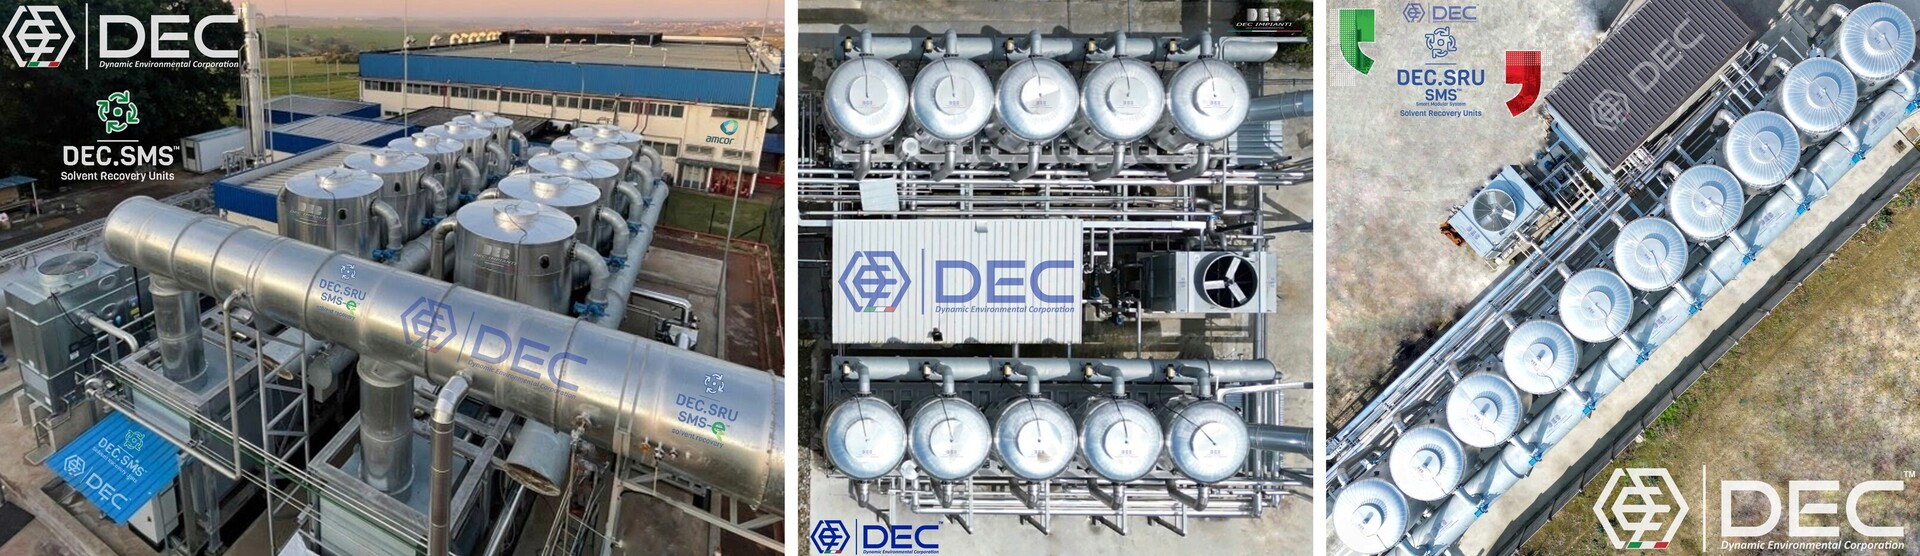 DEC, DEC IMPIANTI, DEC HOLDING, DEC SERVICE, DEC ENGINEERING, DEC AUTOMATION, DEC LAB, DEC ANALYTICS, DEC.SMS, SMS, SRU, Smart Modular System, VOC emission control, solvent recovery, VOC recovery, VOC abatement, VOC emission control technology, VOC abatement systems, air pollution control, solvent recovery systems, environmental compliance, VOC recovery system, solvent recovery unit, VOC recovery equipment, BAT, Best Available Technique, BREF, IED, Industrial Emissions Directive, solvent recovery equipment, solvent recycling, VOC capture, solvent reclamation, solvent purification, VOC treatment, solvent regeneration, distillation, solvent distillation, VOC recovery process, activated carbon, adsorbent, nitrogen, oxidizer, thermal oxidation, regenerative thermal oxidizer, LEL monitoring, solvent recovery for flexible packaging, flexible packaging, converting, engineering, supply, turnkey, sustainable, innovation, decarbonization, low carbon emissions, green deal, carbon reduction, low carbon, carbon neutrality, net-zero emissions, greenhouse gas mitigation, carbon footprint, carbon capture and storage (CCS), GHG, CO2, energy efficiency, chemical recycling, recycling, sustainability solutions, sustainability, reclaiming, carbon offset, circular economy, climate change, climate policy, climate action, environmental challenges, sustainable development, sustainability roadmap, ESG, TBL